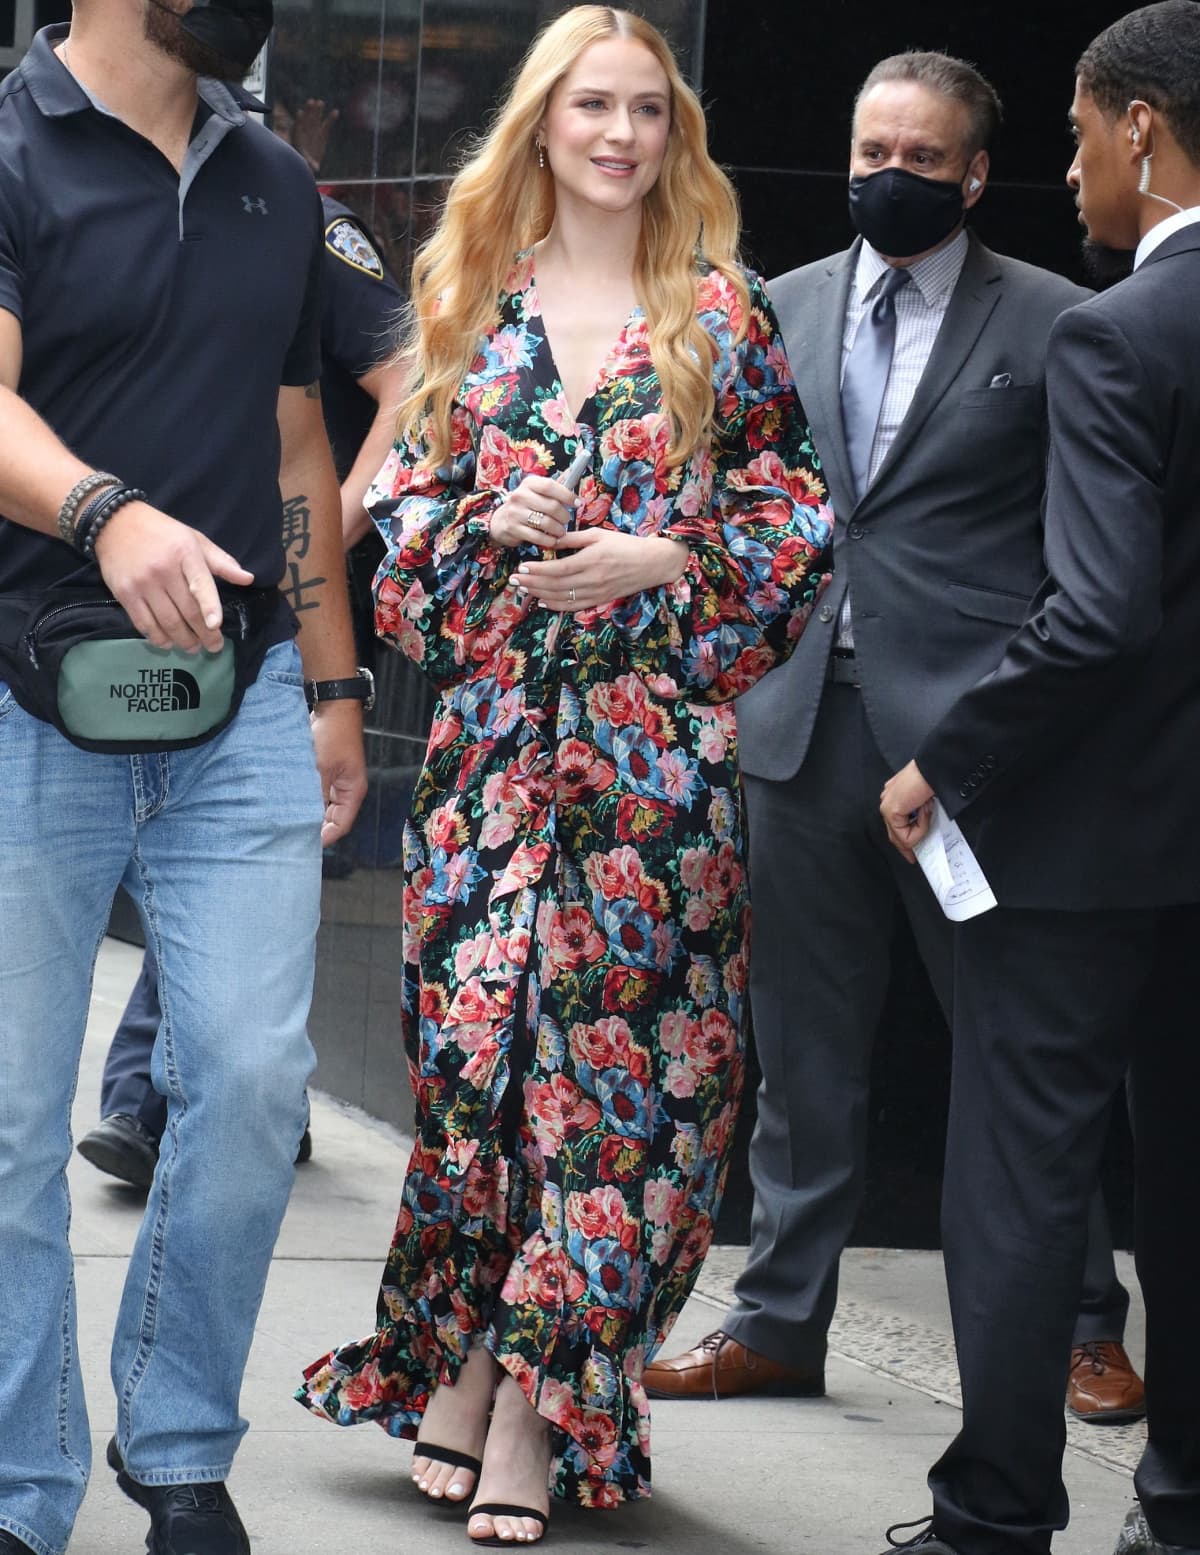 Evan Rachel Wood wearing a floral maxi dress from The Vampire’s Wife outside the Good Morning America studios